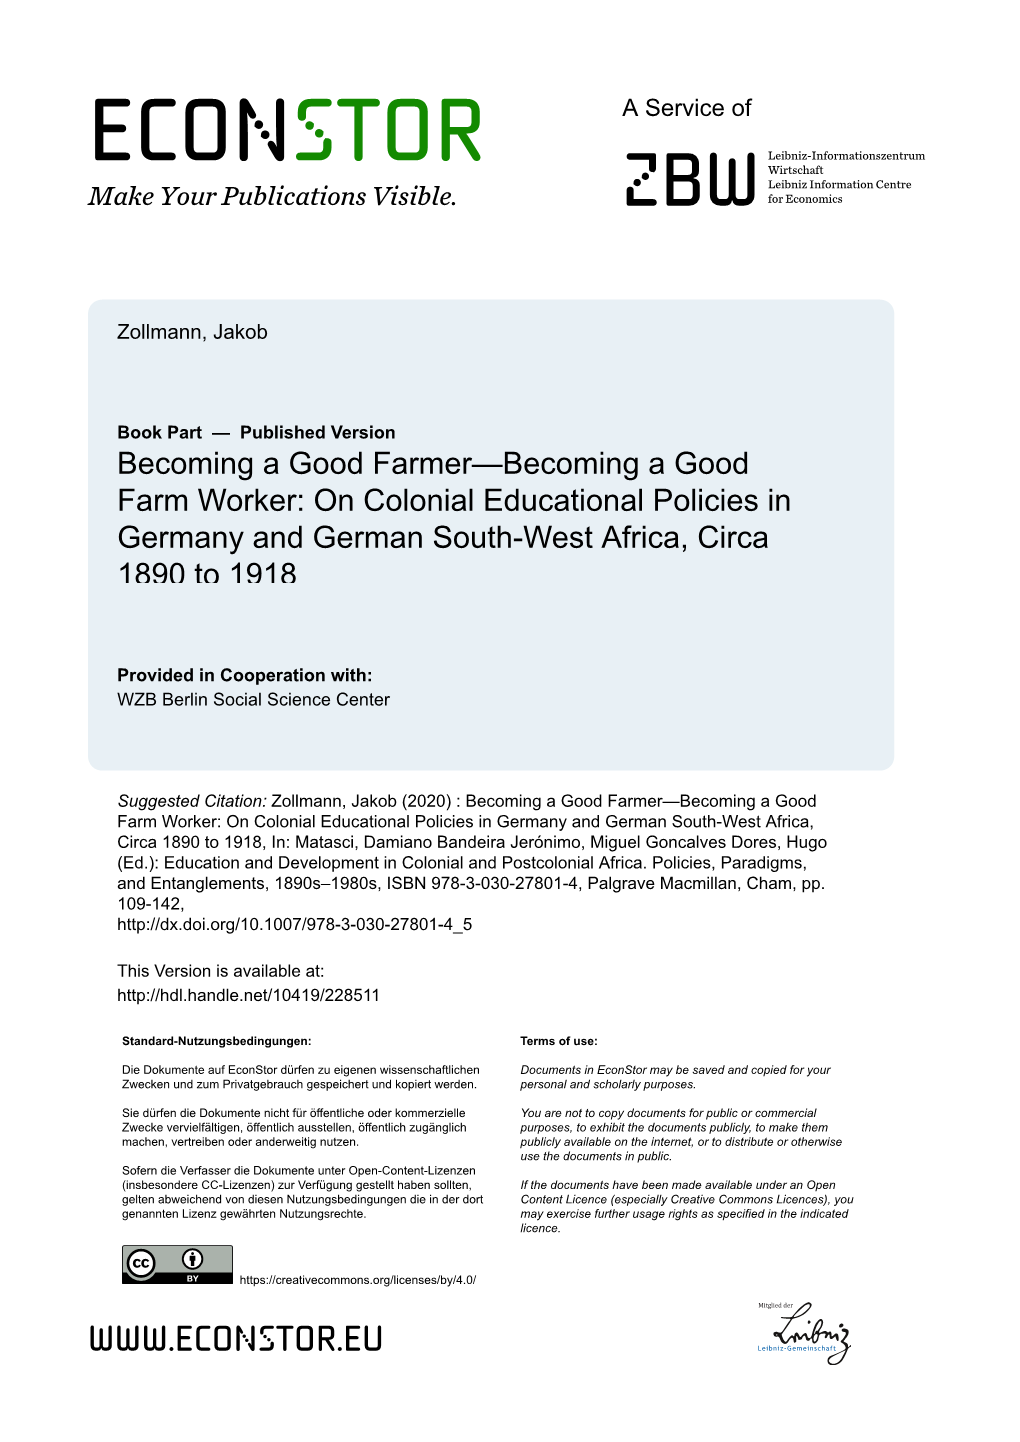 On Colonial Educational Policies in Germany and German South-West Africa, Circa 1890 to 1918